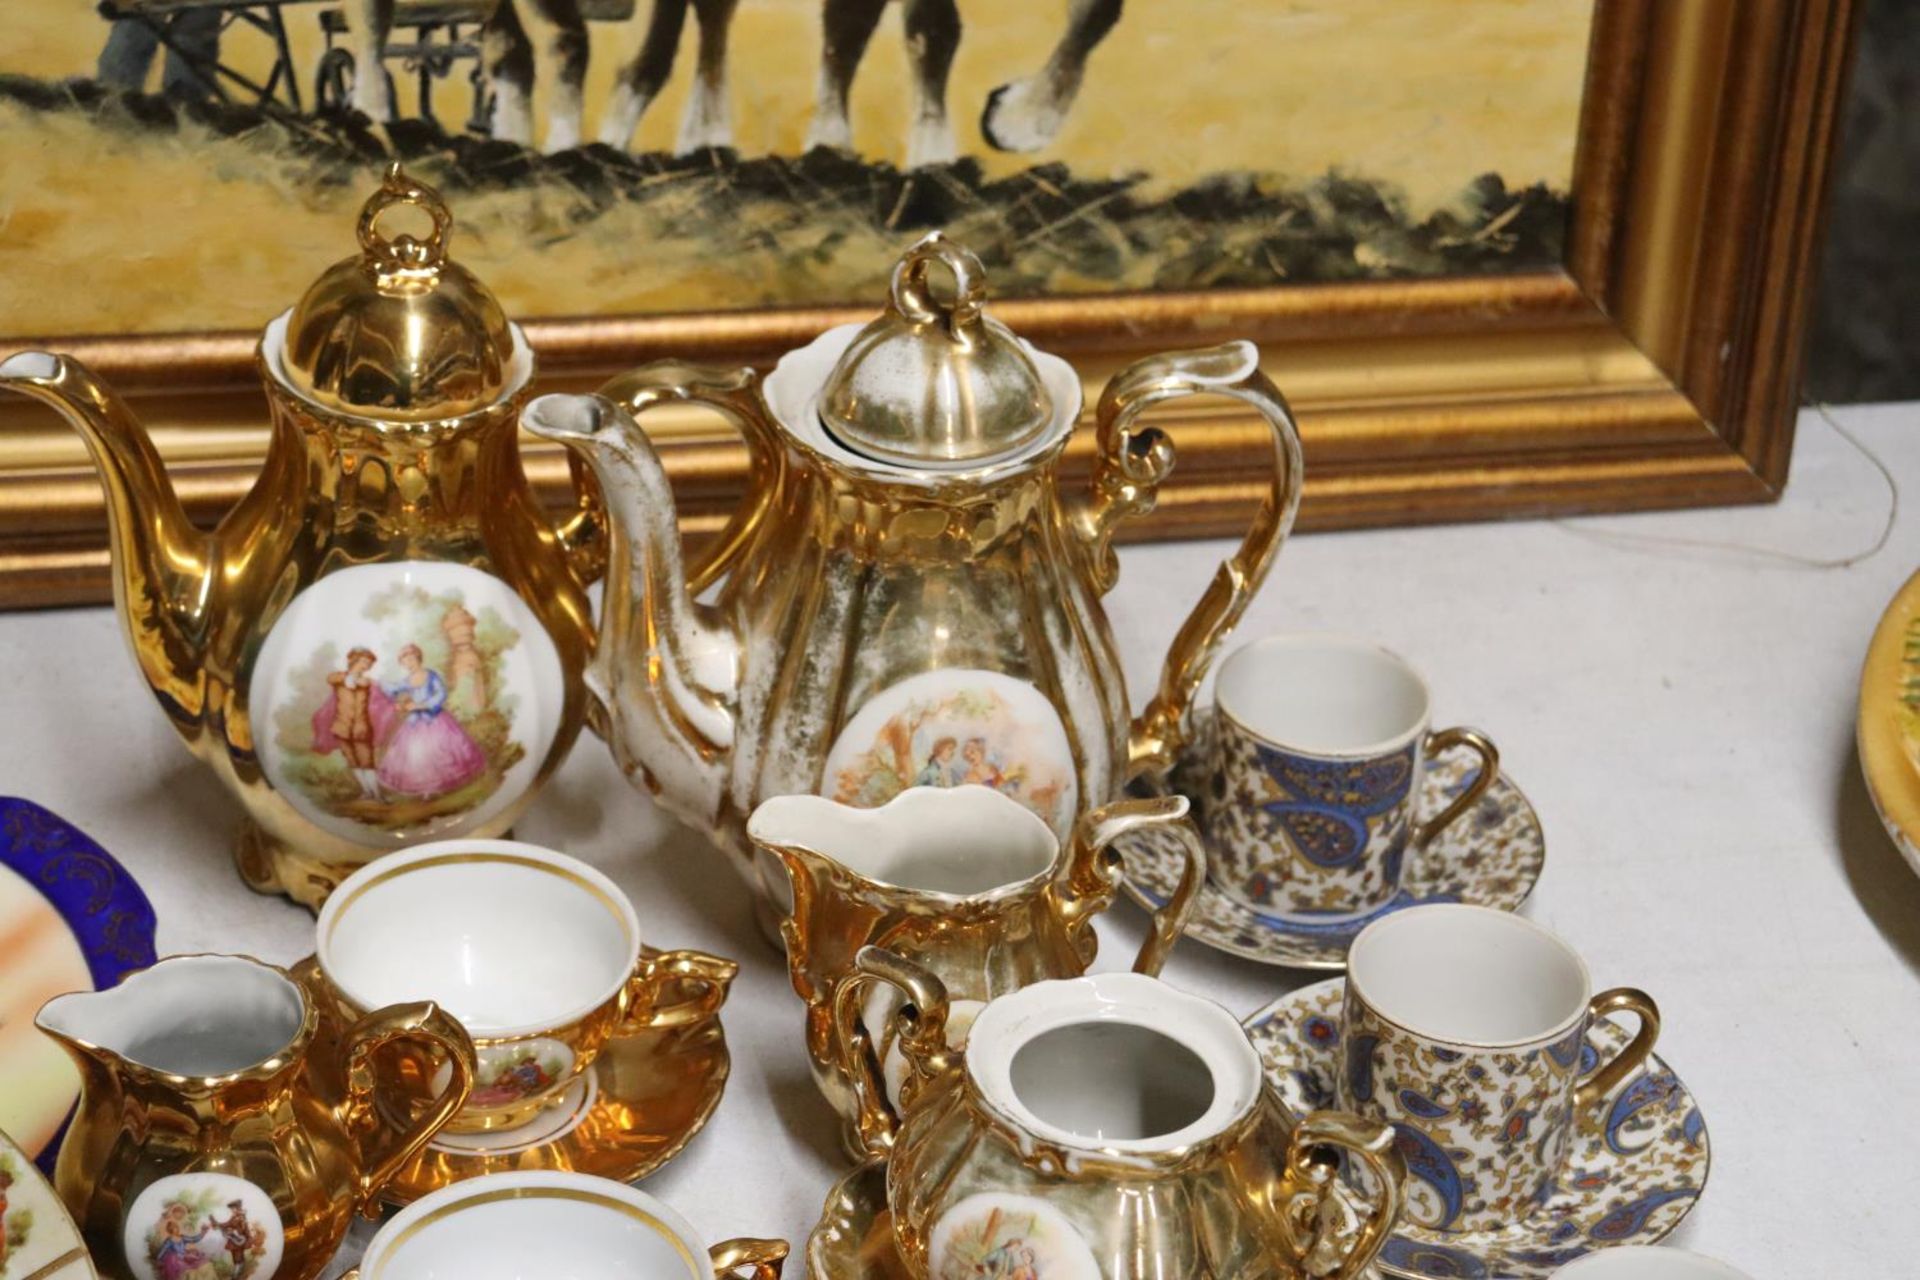 A QUANTITY OF VINTAGE TEAWARE TO INCLUDE GERMAN GILT WITH A CLASSICAL DESIGN, COFFEE POTS, SUGAR - Image 2 of 6